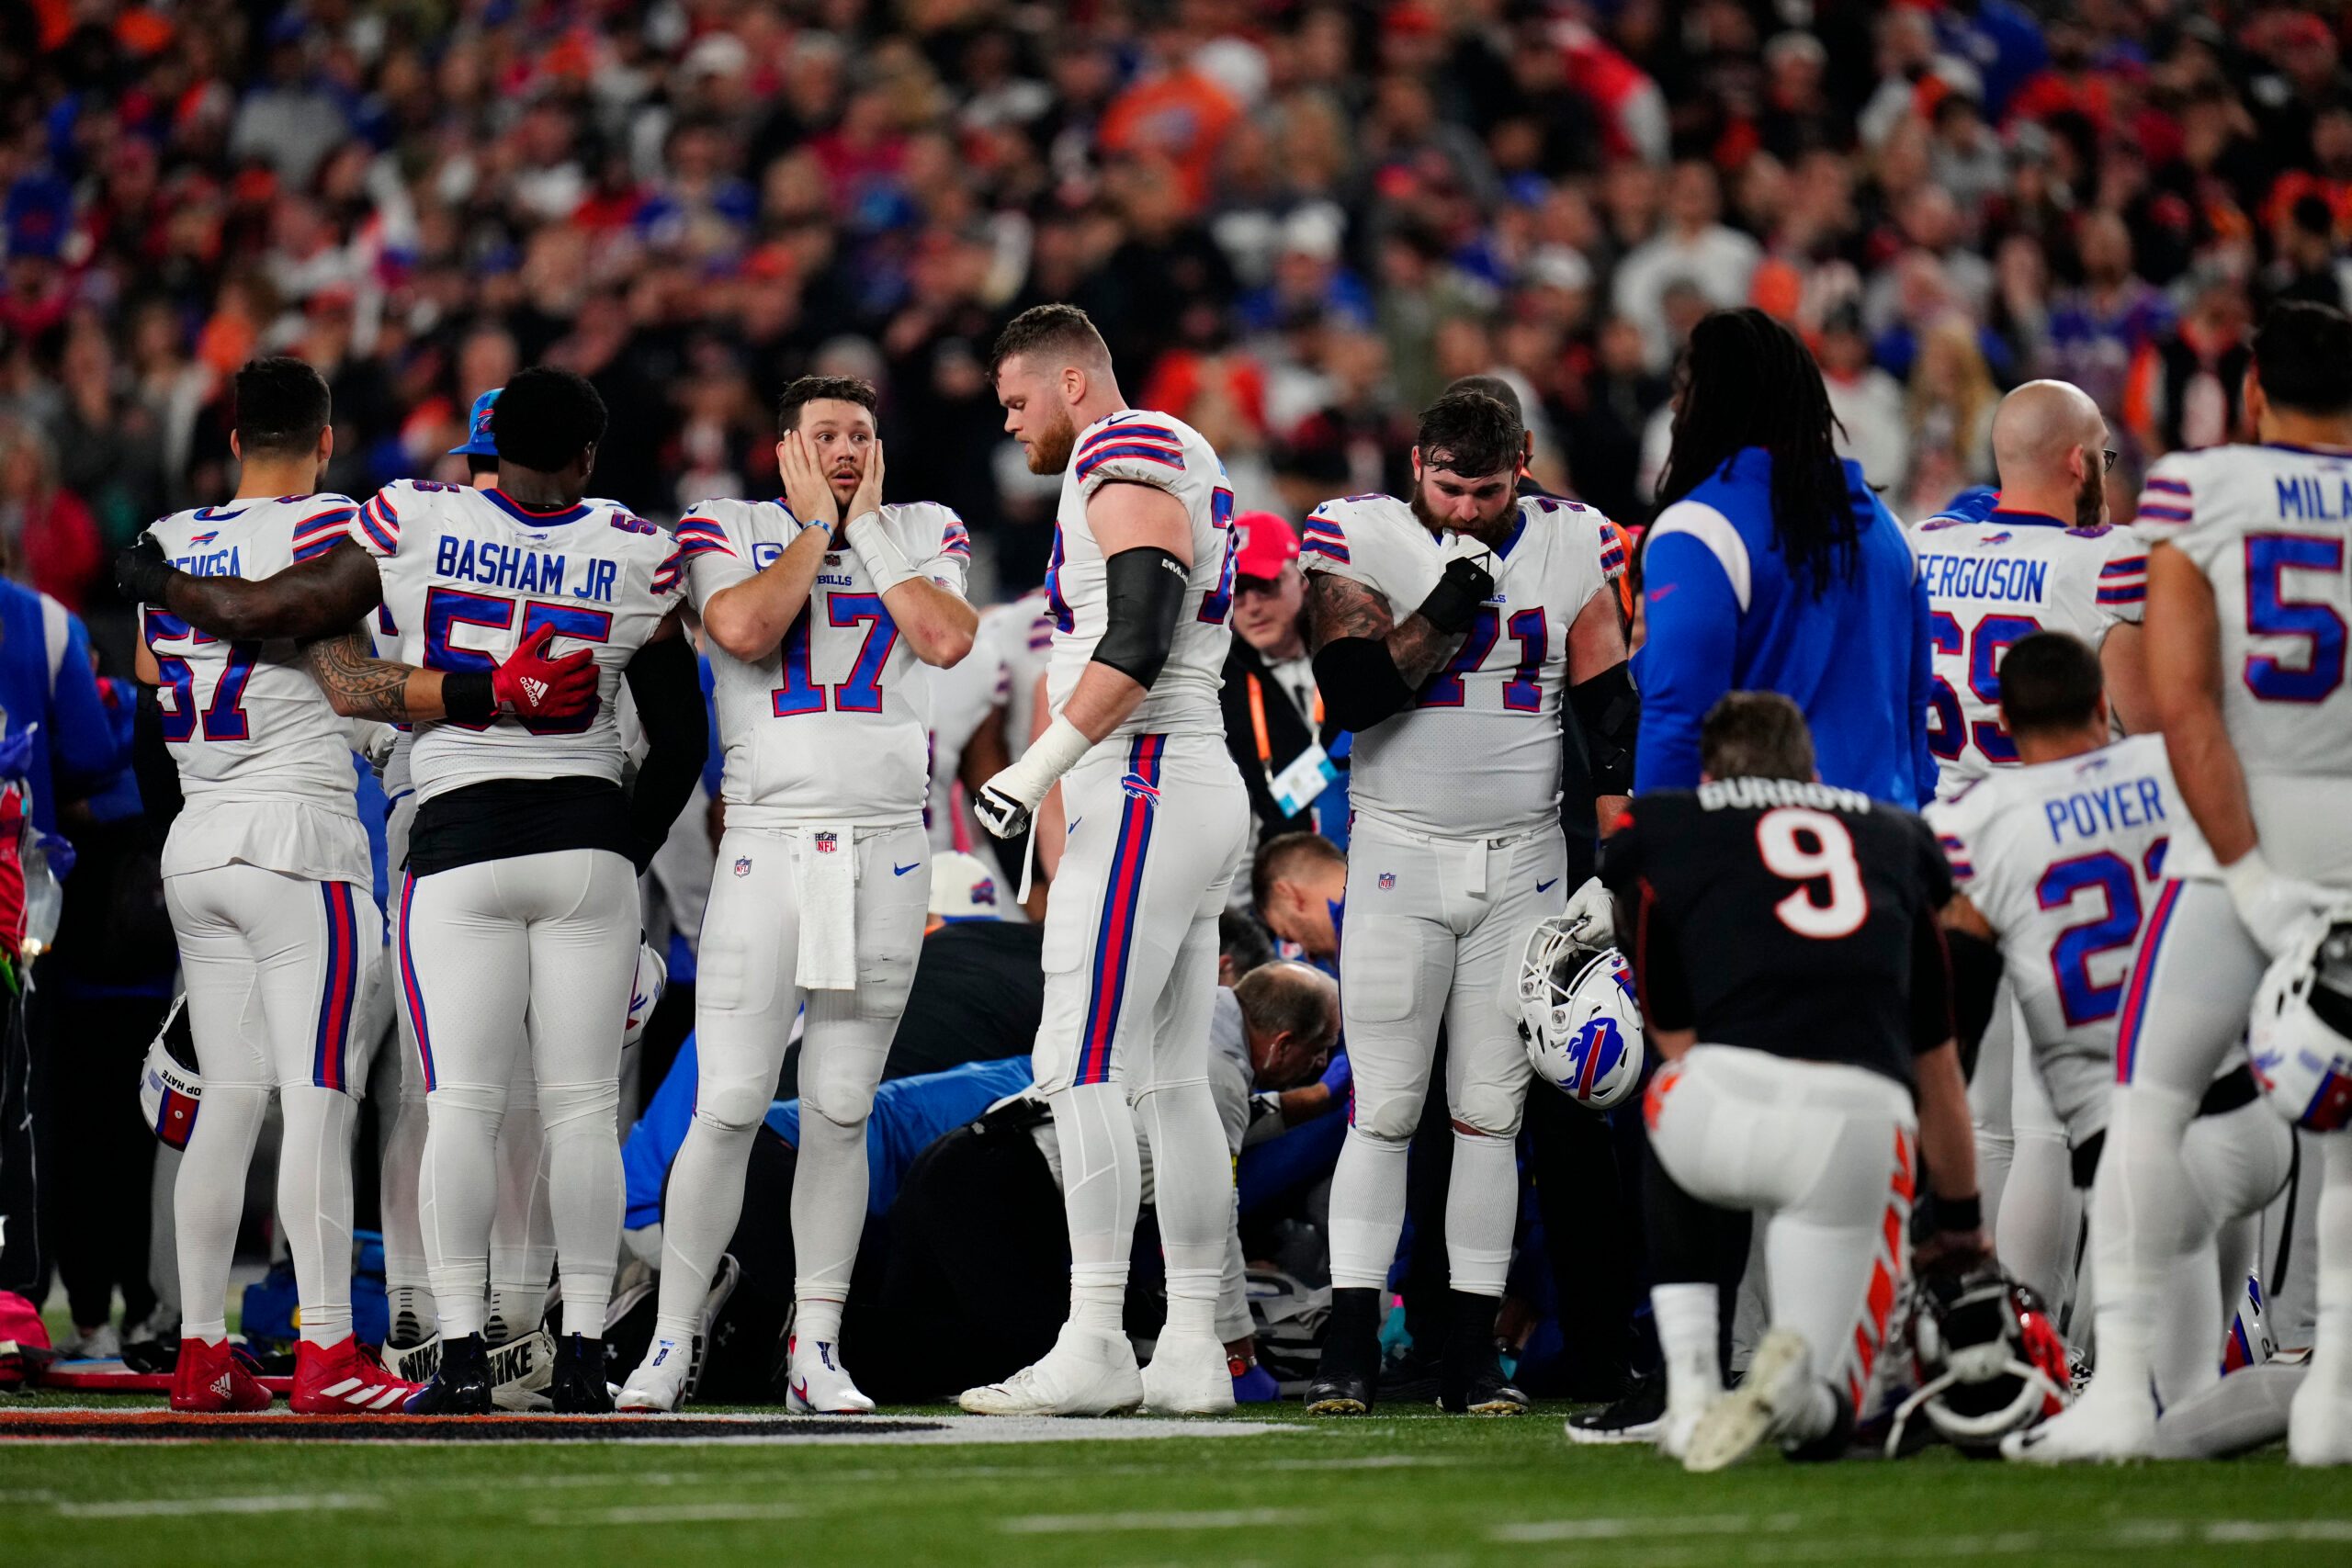 Buffalo’s Hamlin in critical condition after collapsing on field; game postponed